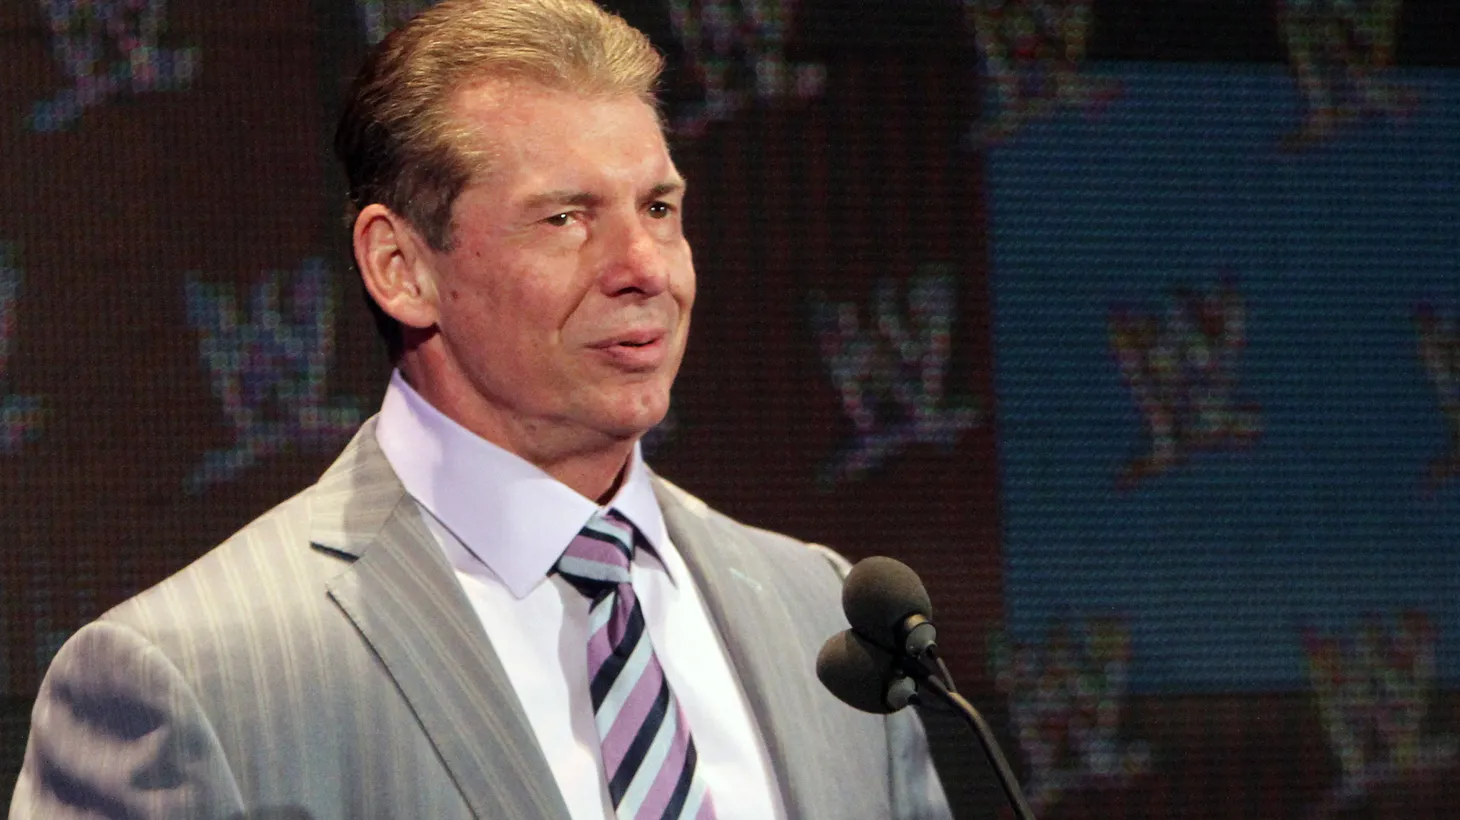 Mogul Vince McMahon resigned from the WWE this week following accusations of sex trafficking and sexual abuse in a lawsuit.